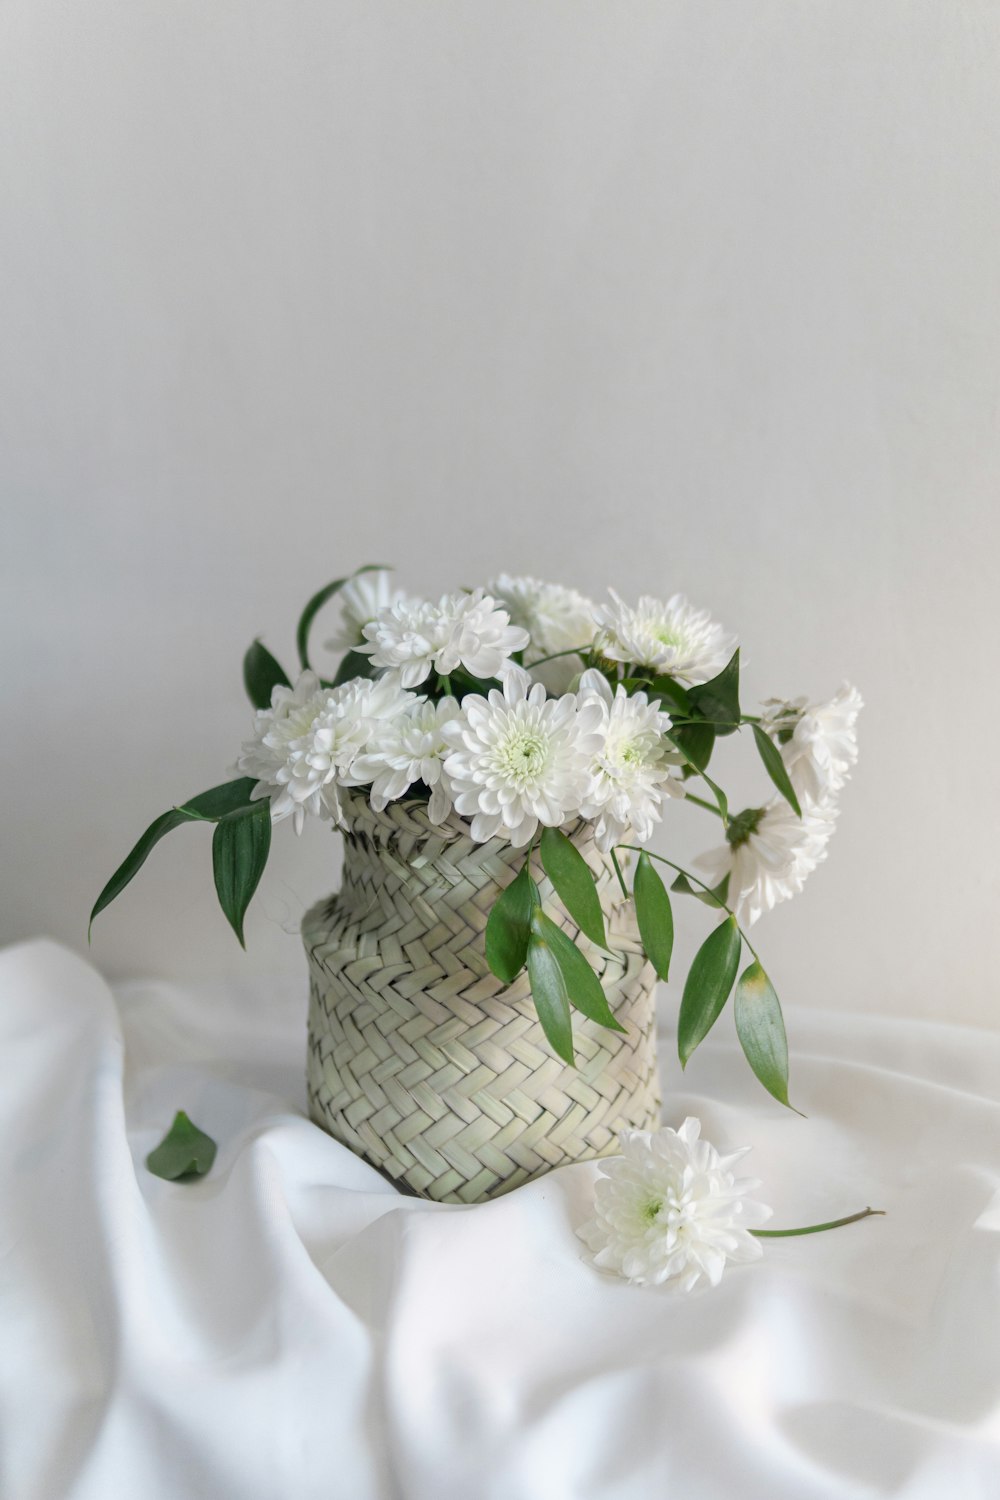 a basket of white flowers on a white cloth